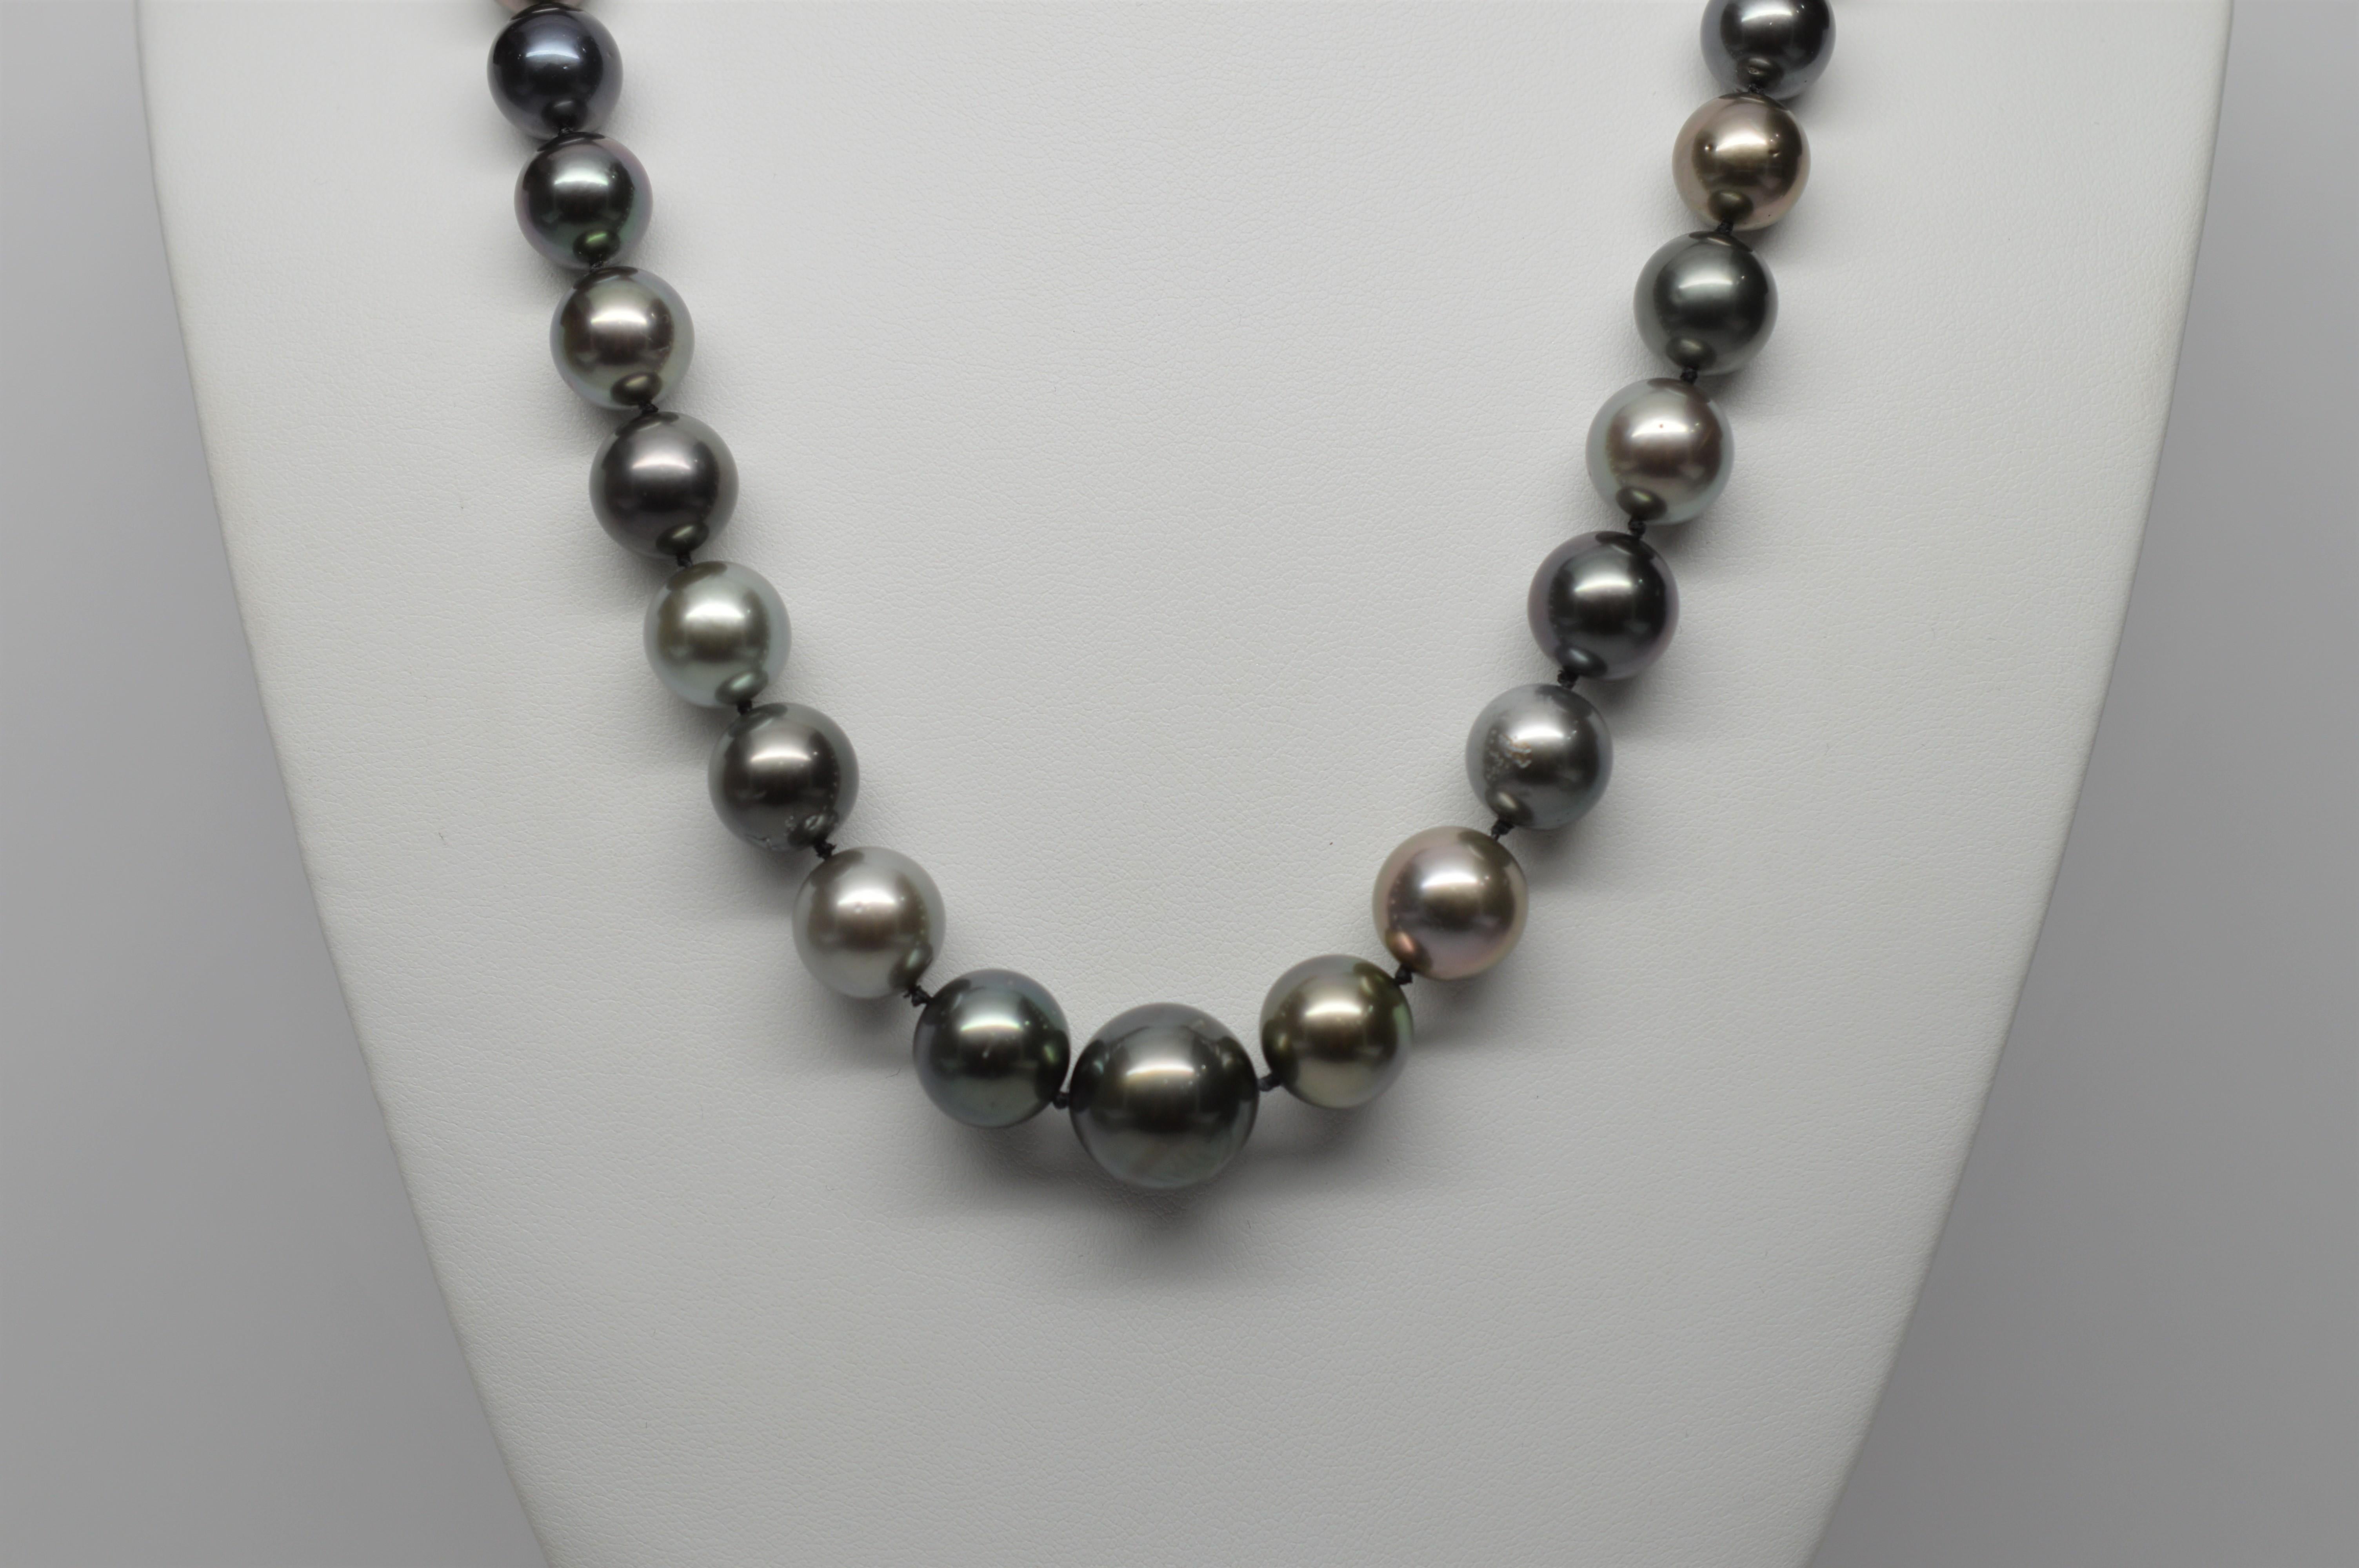 Fabulous fine South Sea Tahitian Pearl Necklace consisting of forty-one genuine graduated lustrous rich Tahitian Pearls ranging from 10.5mm to 15.25mm. The strand measures 20 inches and is finished with a 14K White Gold decorative clasp with Diamond